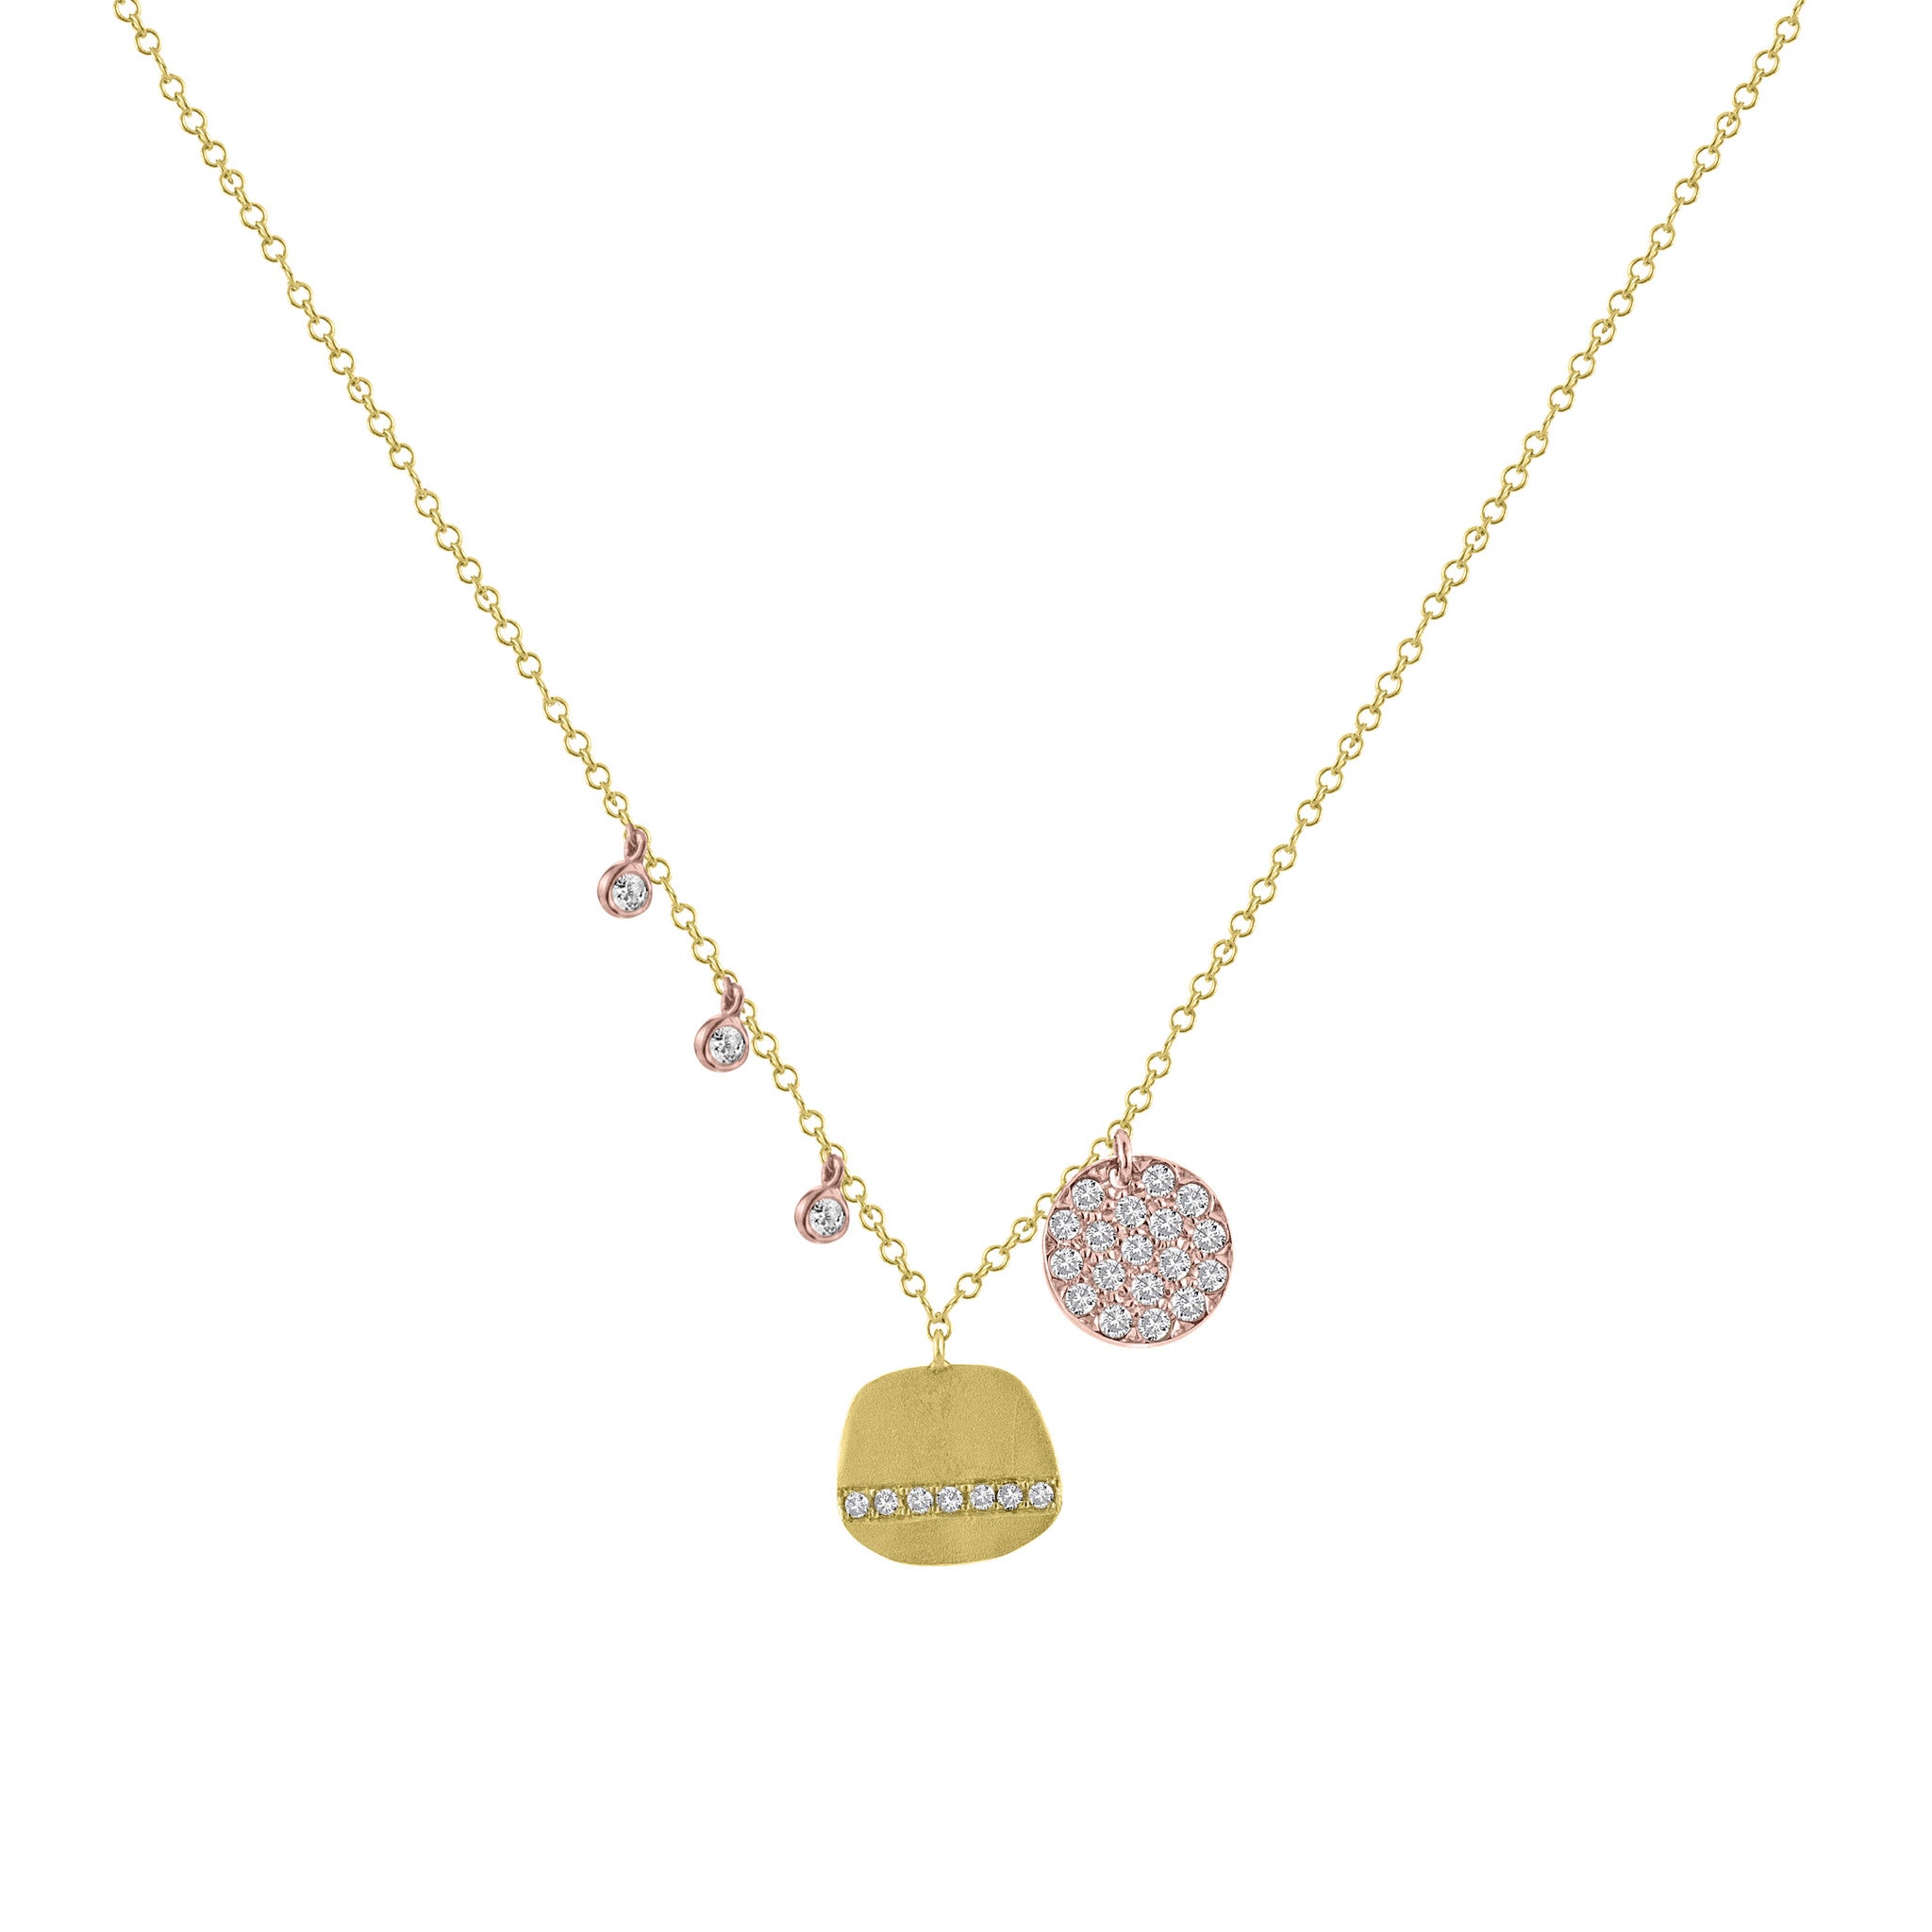 Meira T 14k Textured Yellow Gold Charm Necklace with Off-Centered Charms